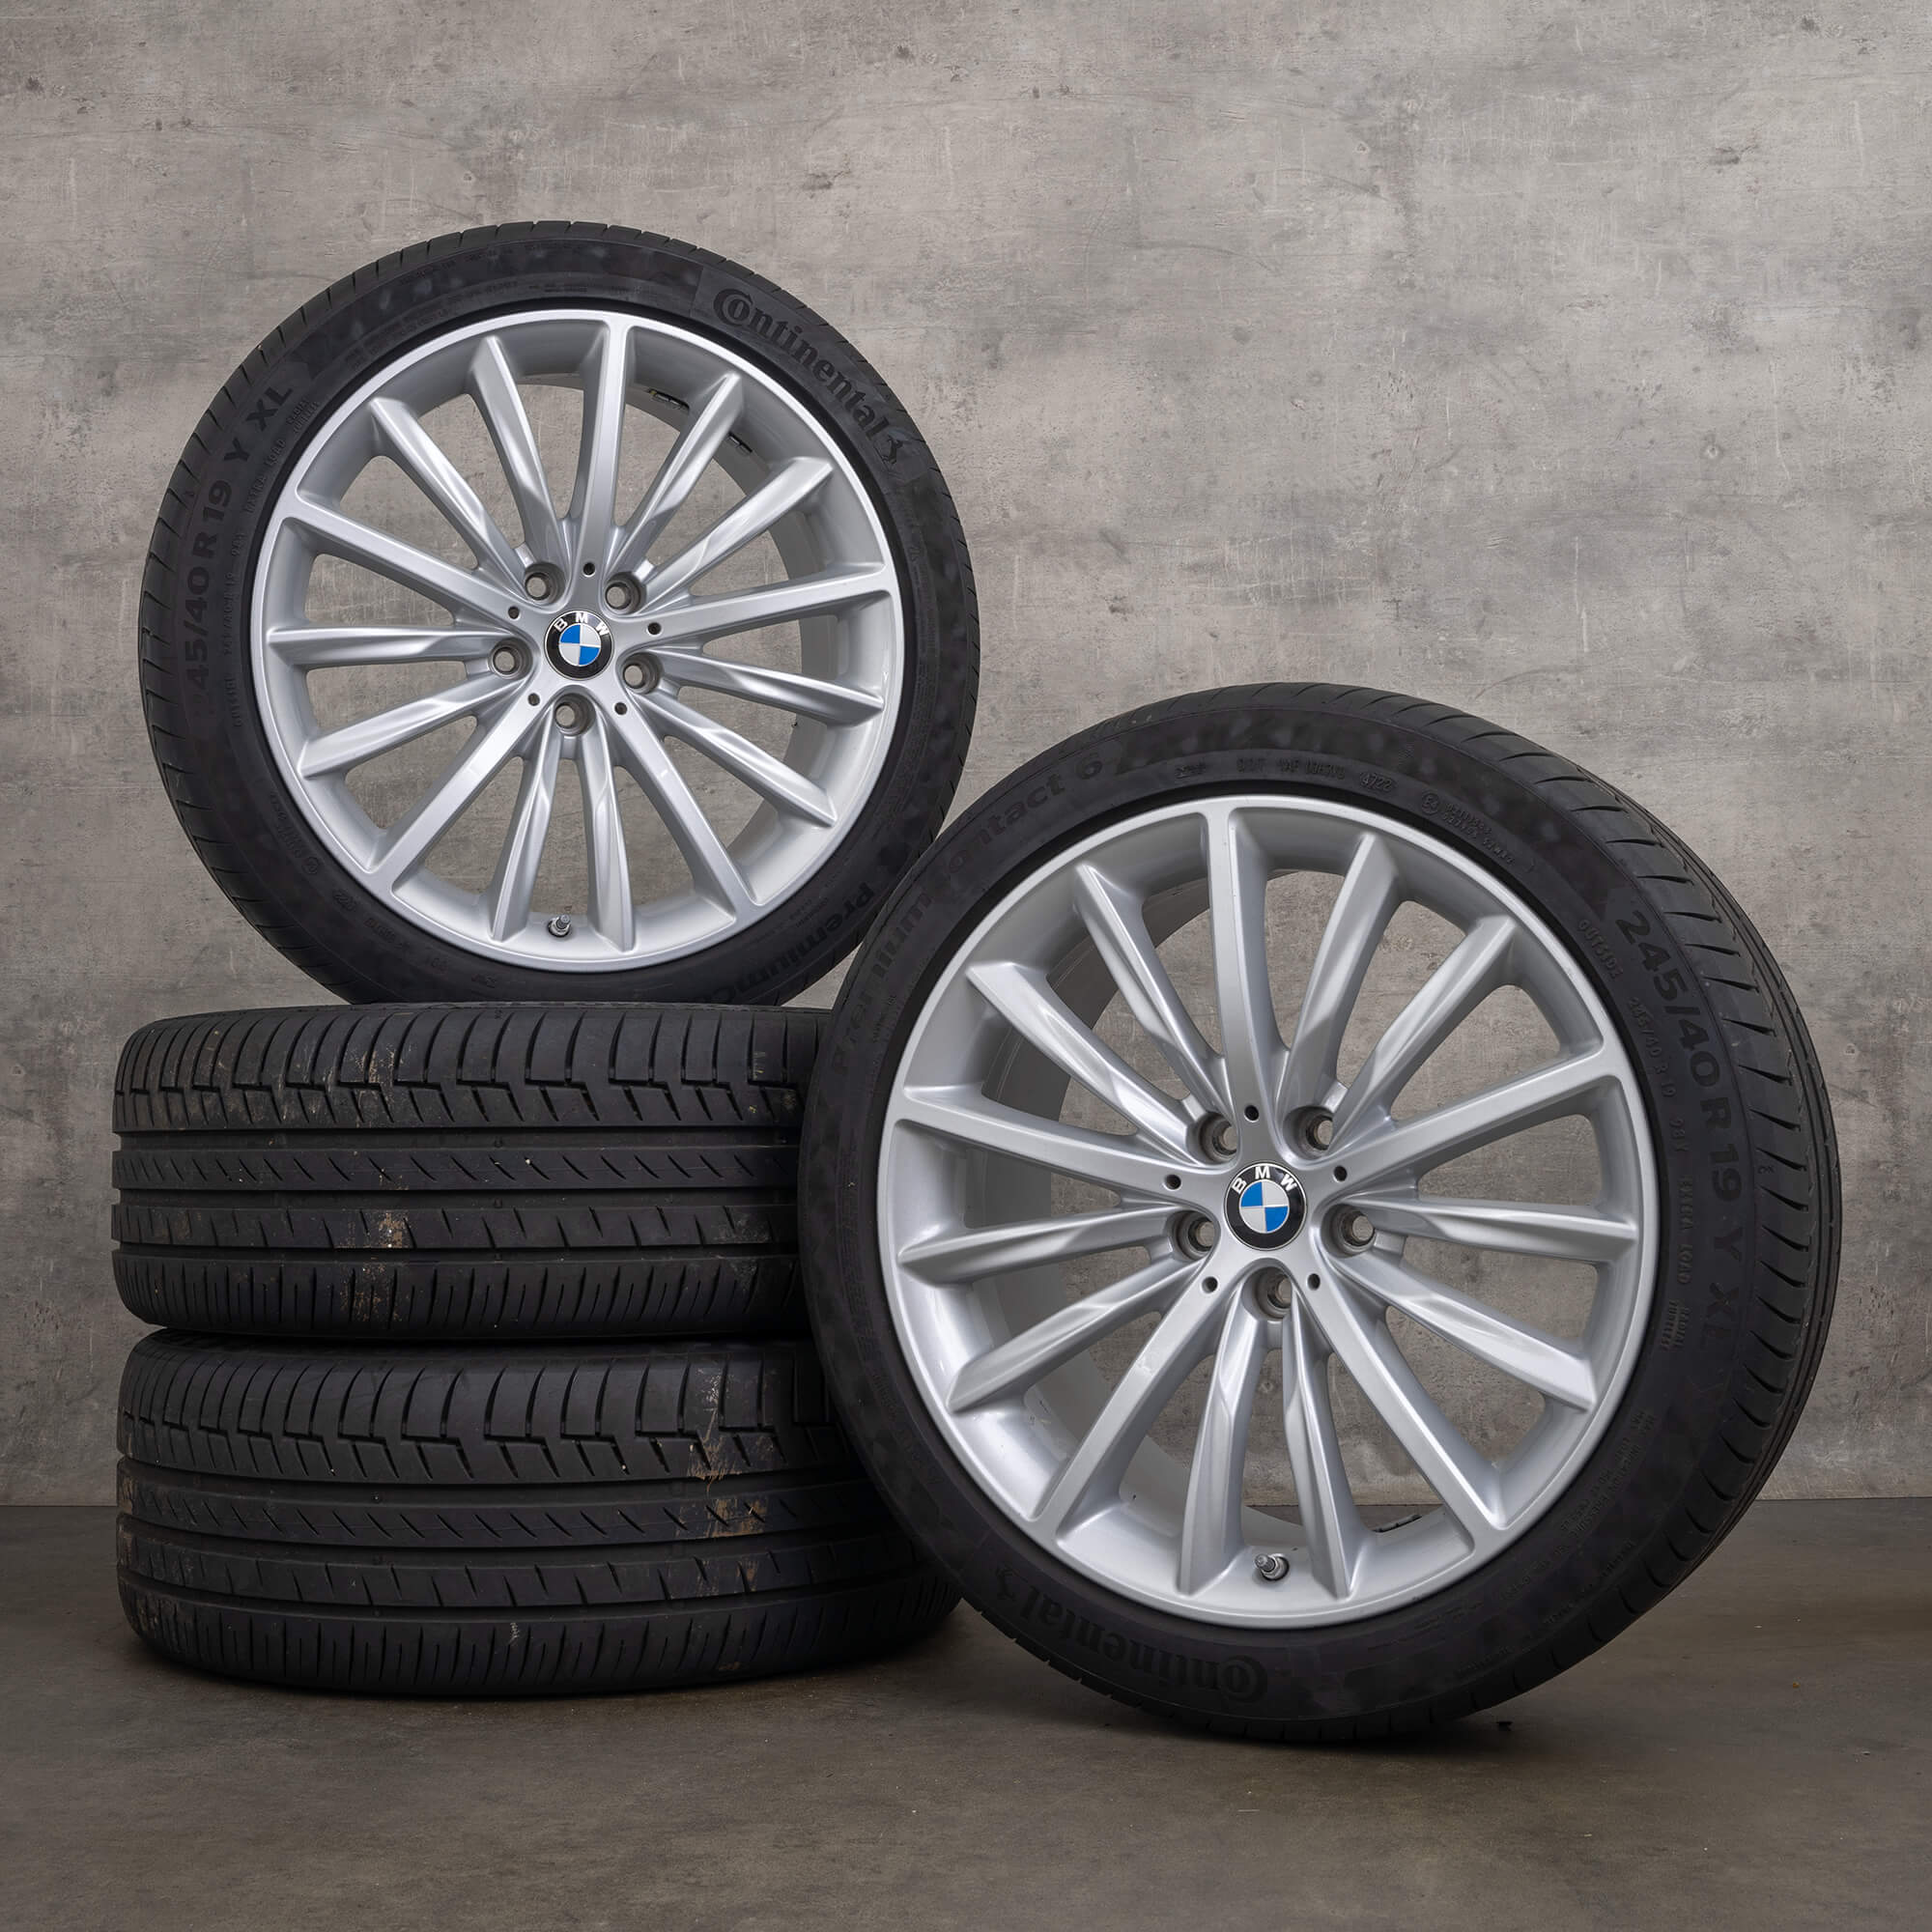 OEM BMW 5 Series G30 G31 19 inch rims winter tires Styling 633 6863419 silver wheels